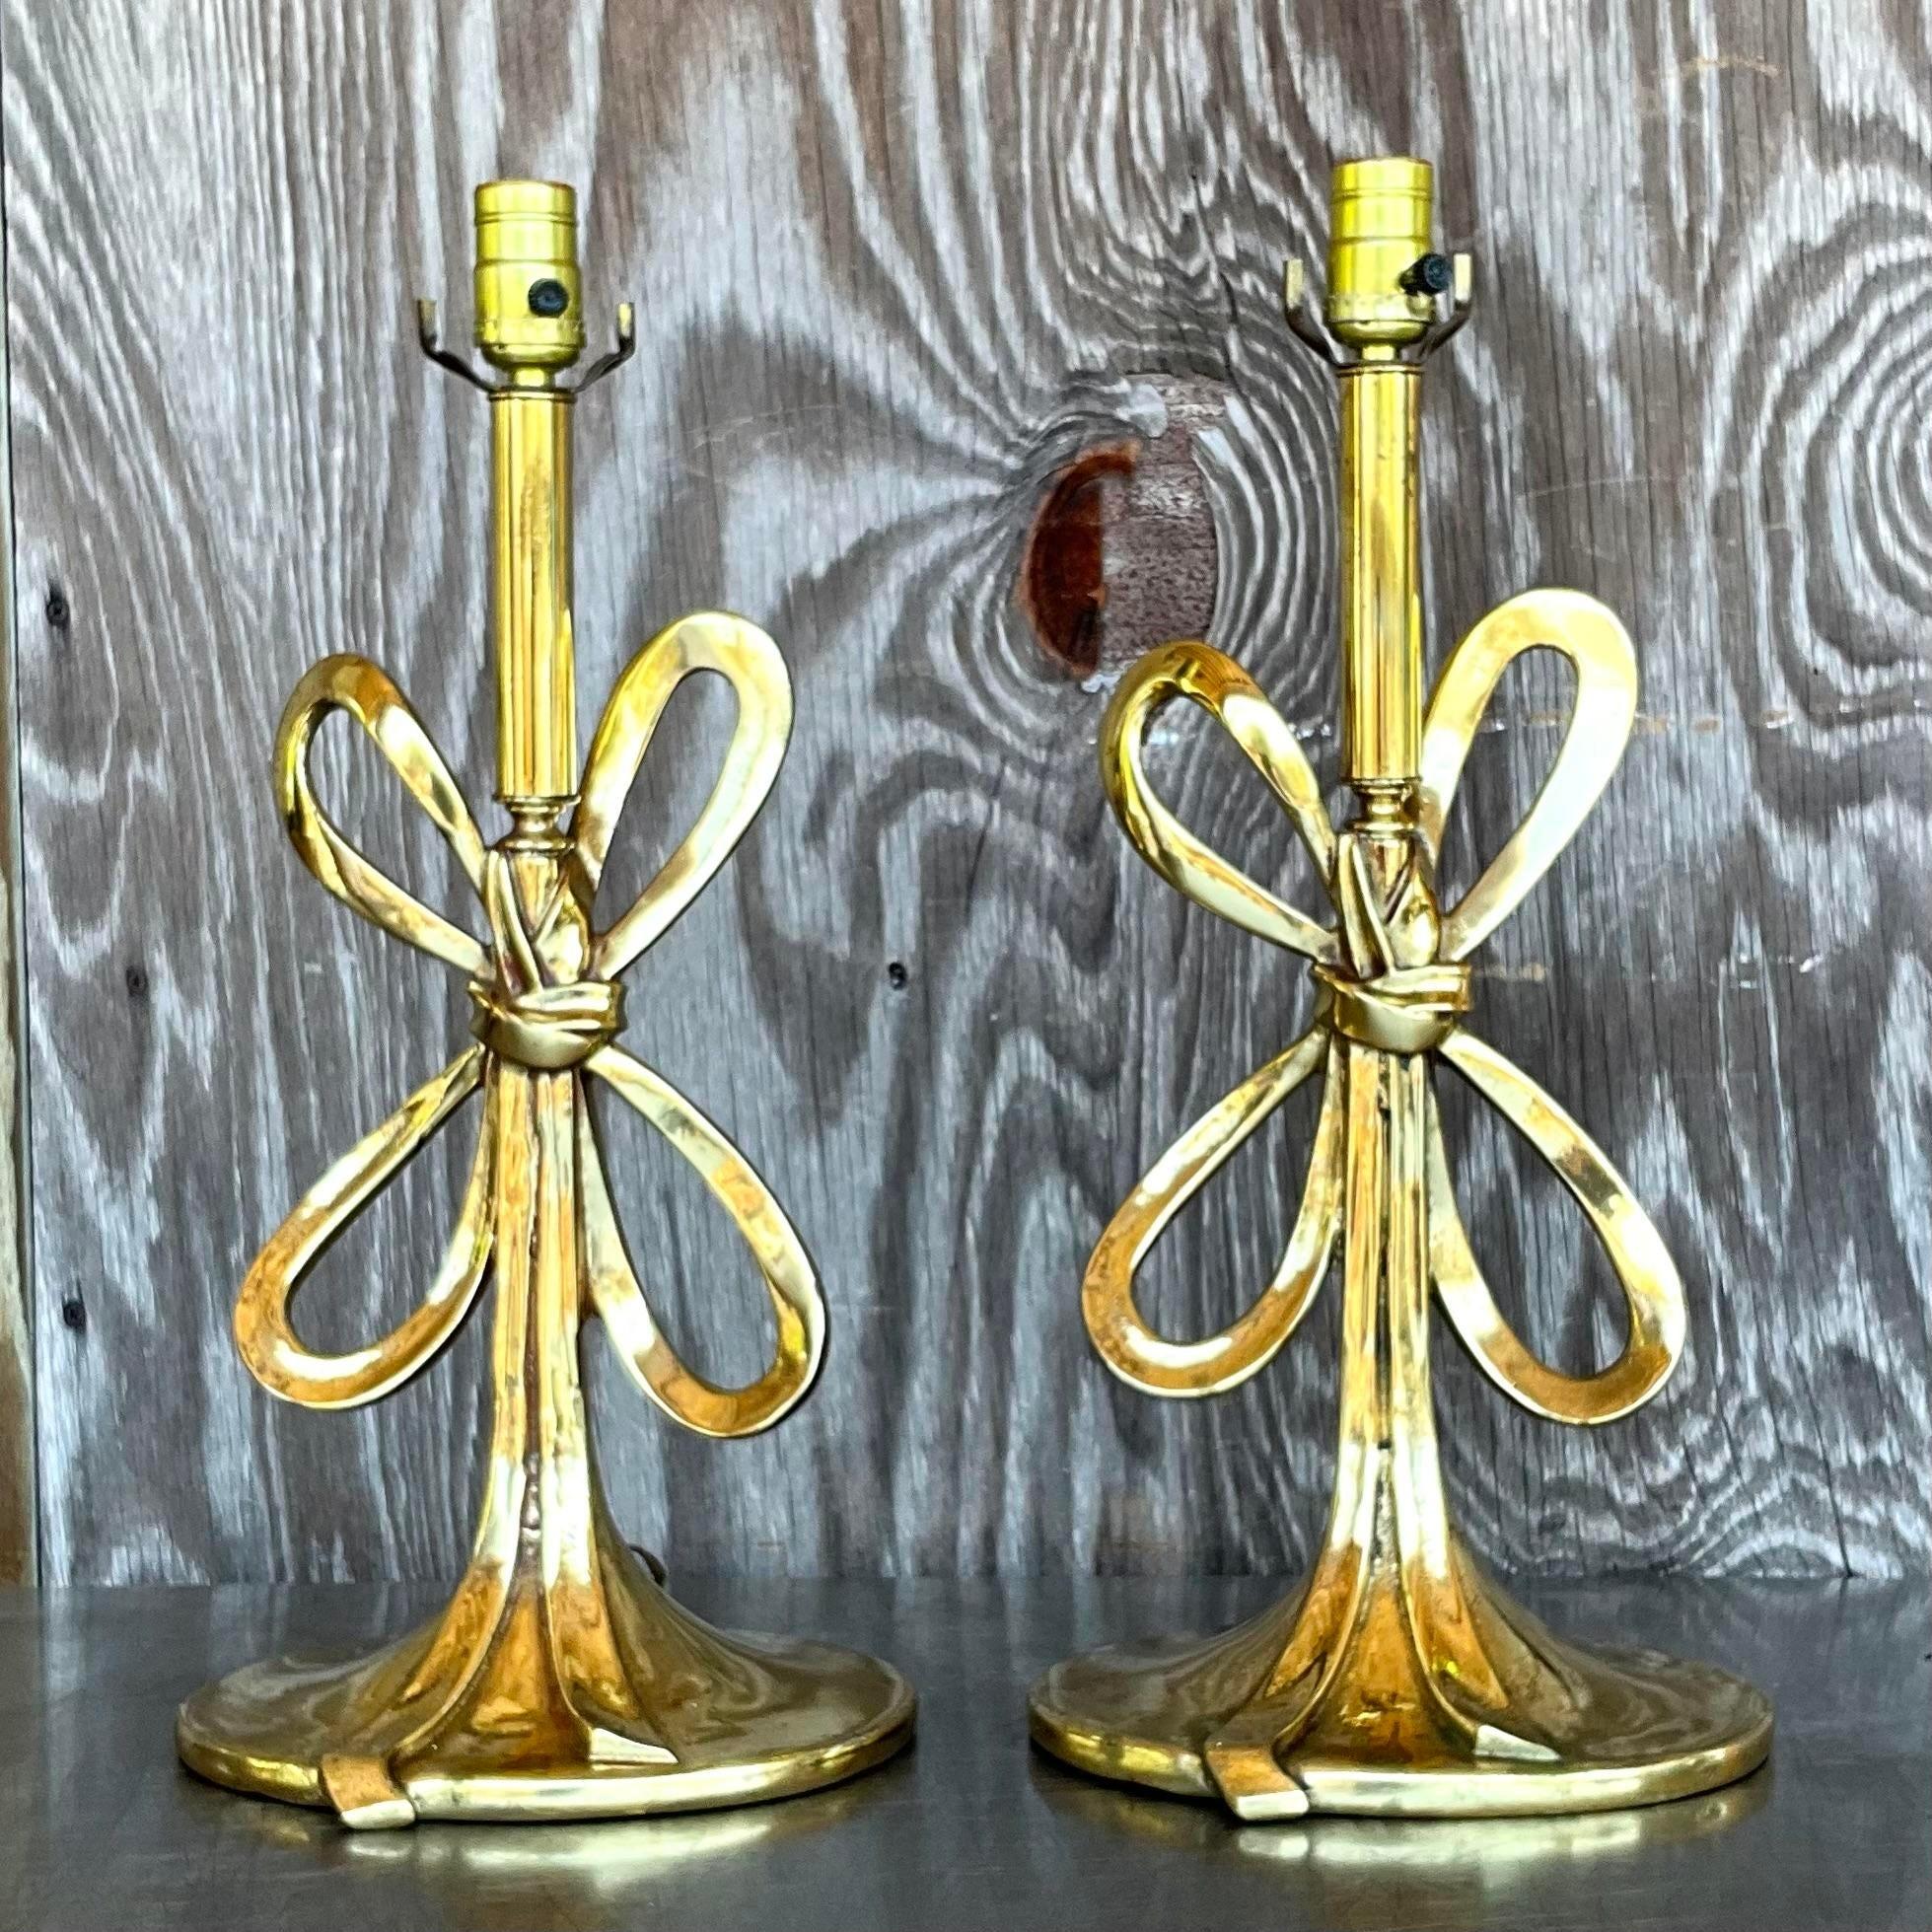 Mid-Century Modern Vintage Italian Regency Polished Brass Bow Lamps - a Pair